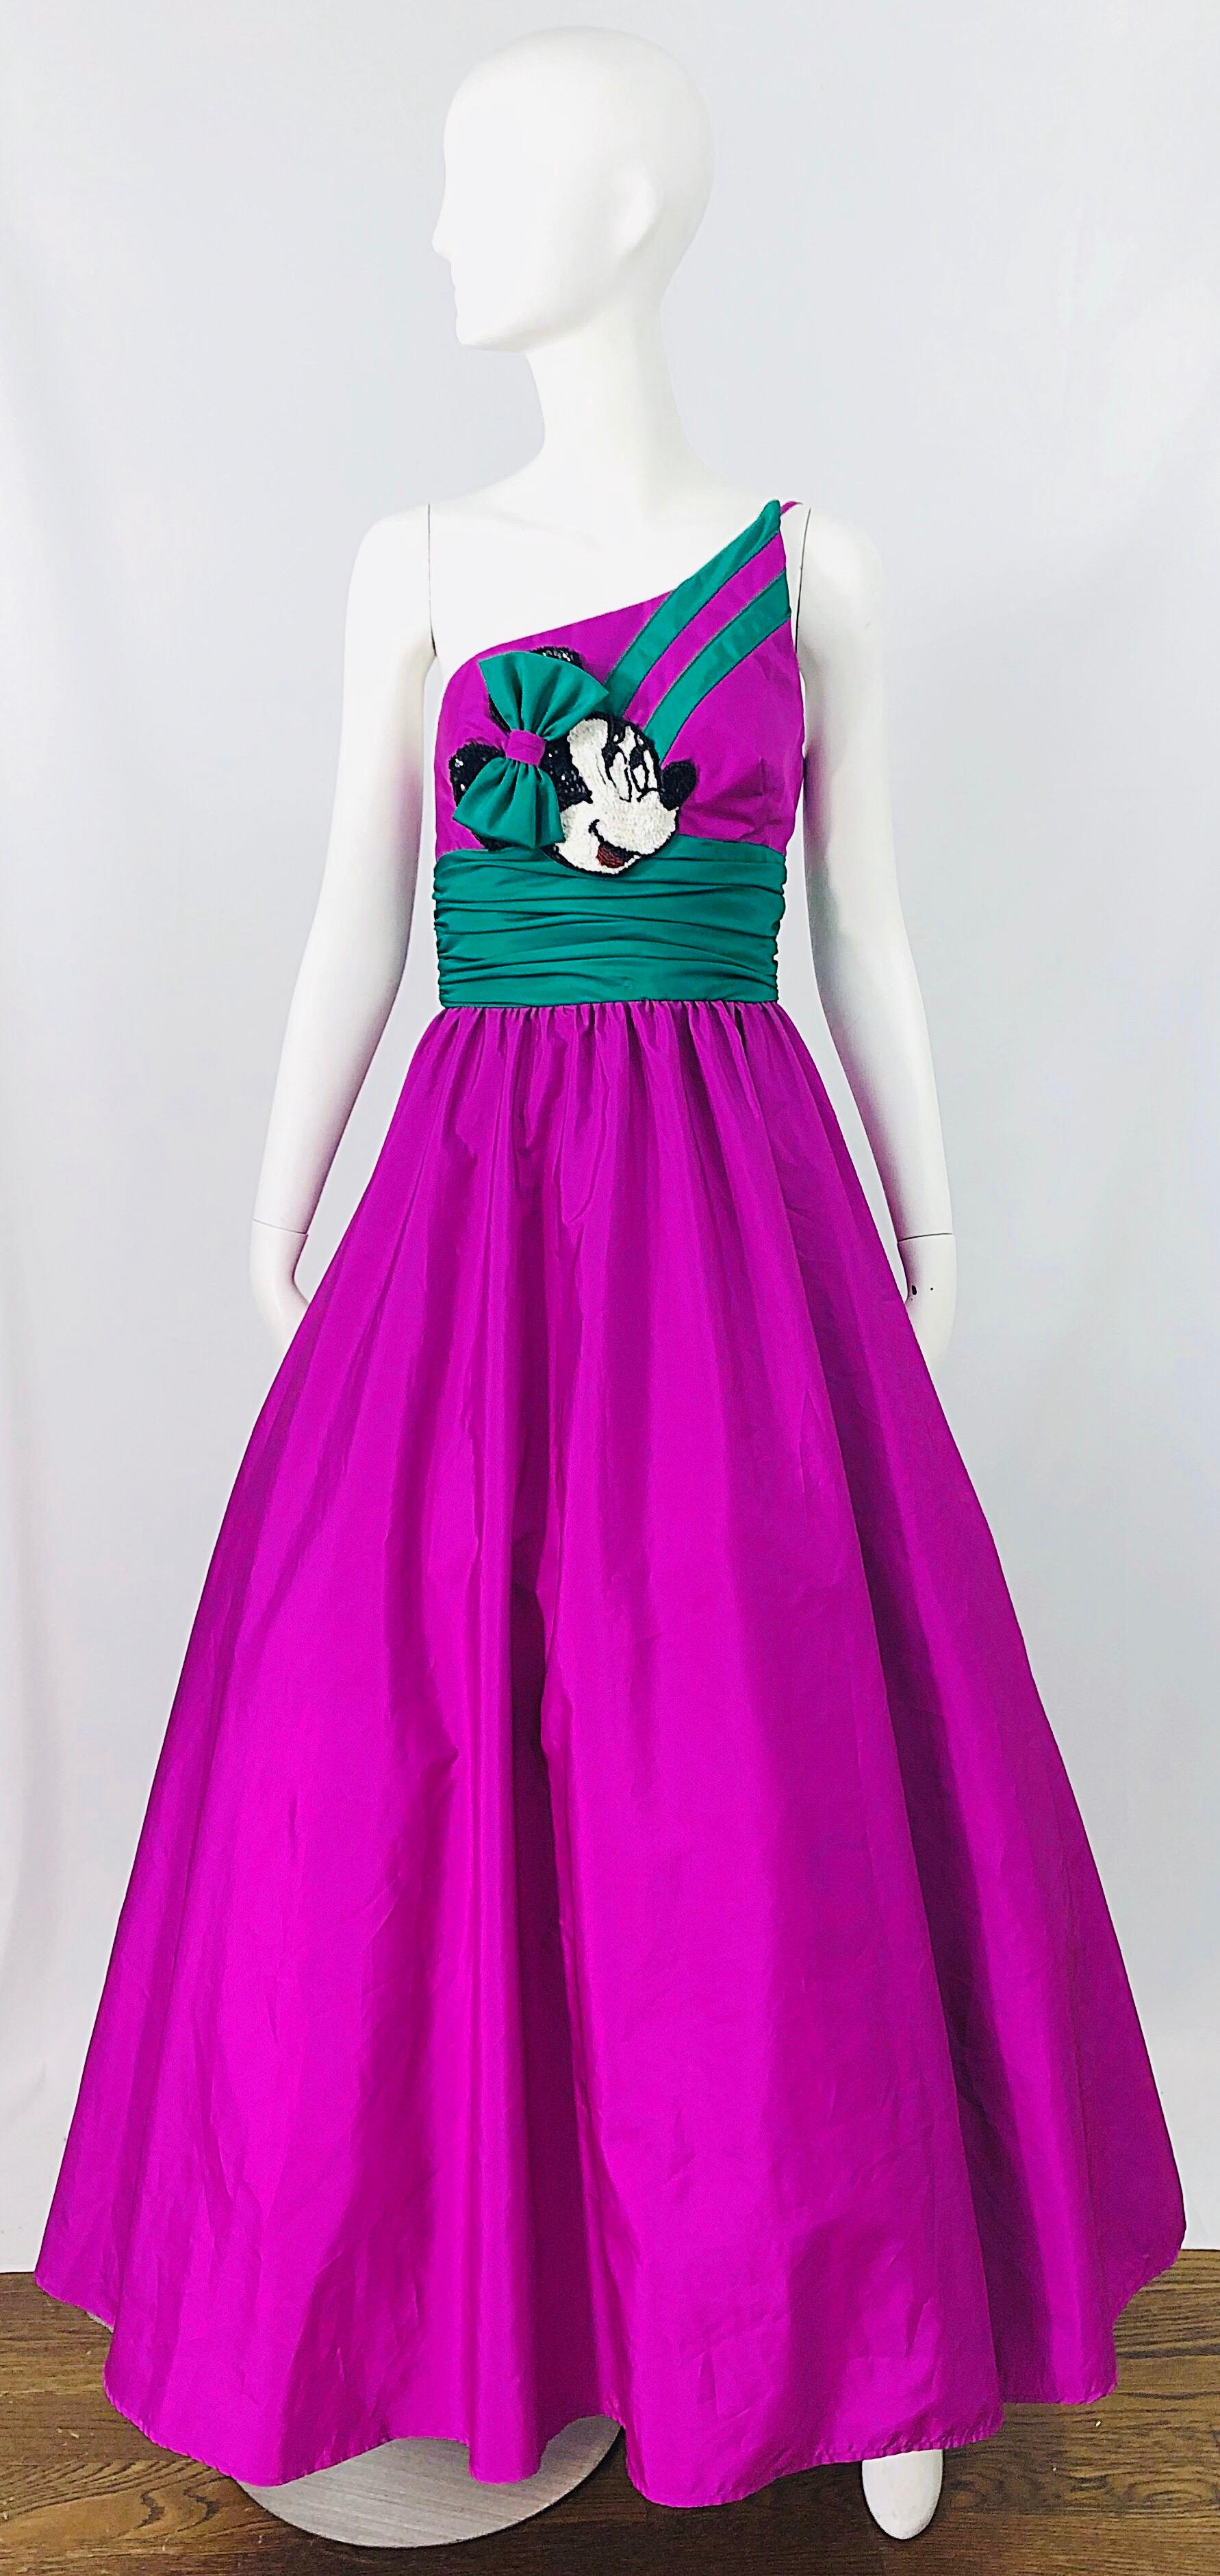 Spectacular 1980s MIKE BENET X DISNEY limited edition purple and green one shoulder sequined gown dress!  Features a purple taffeta with kelly green cummerbund. Minnie Mouse detail at center bust features hundreds of hand sewn sequins. Hidden zipper